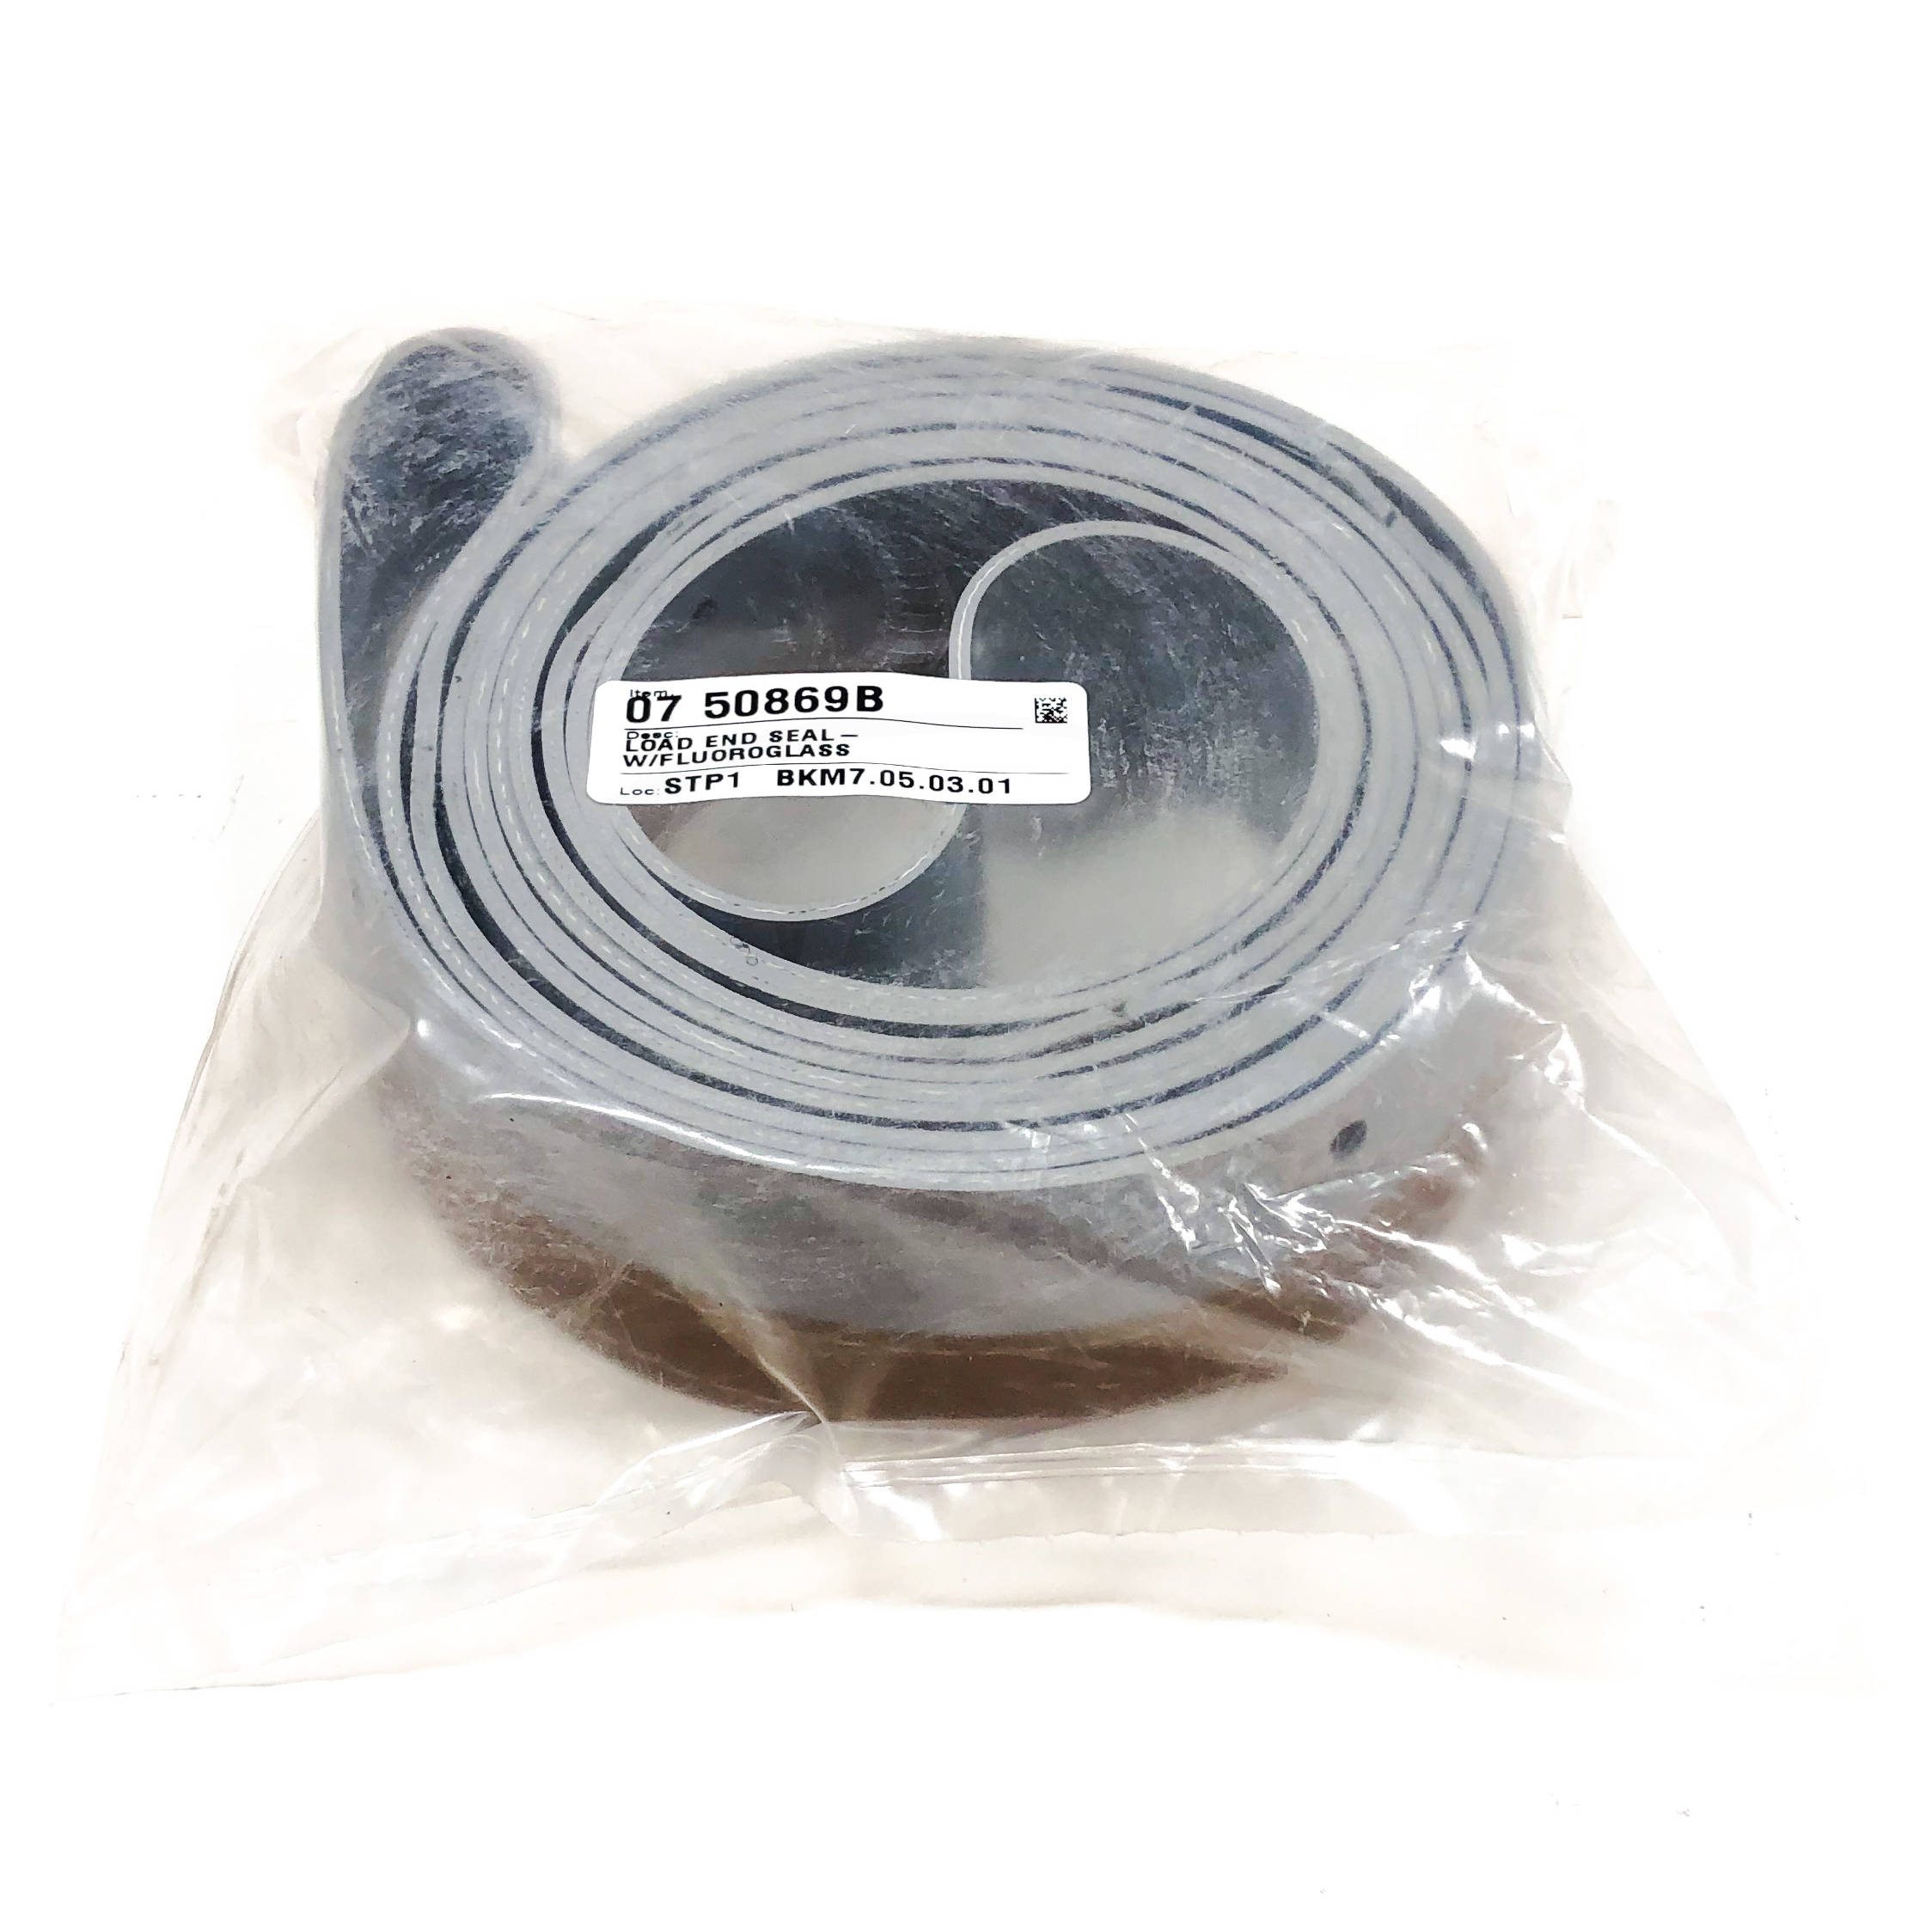 07 50869B Milnor Load End Seal with Fluoroglass 4